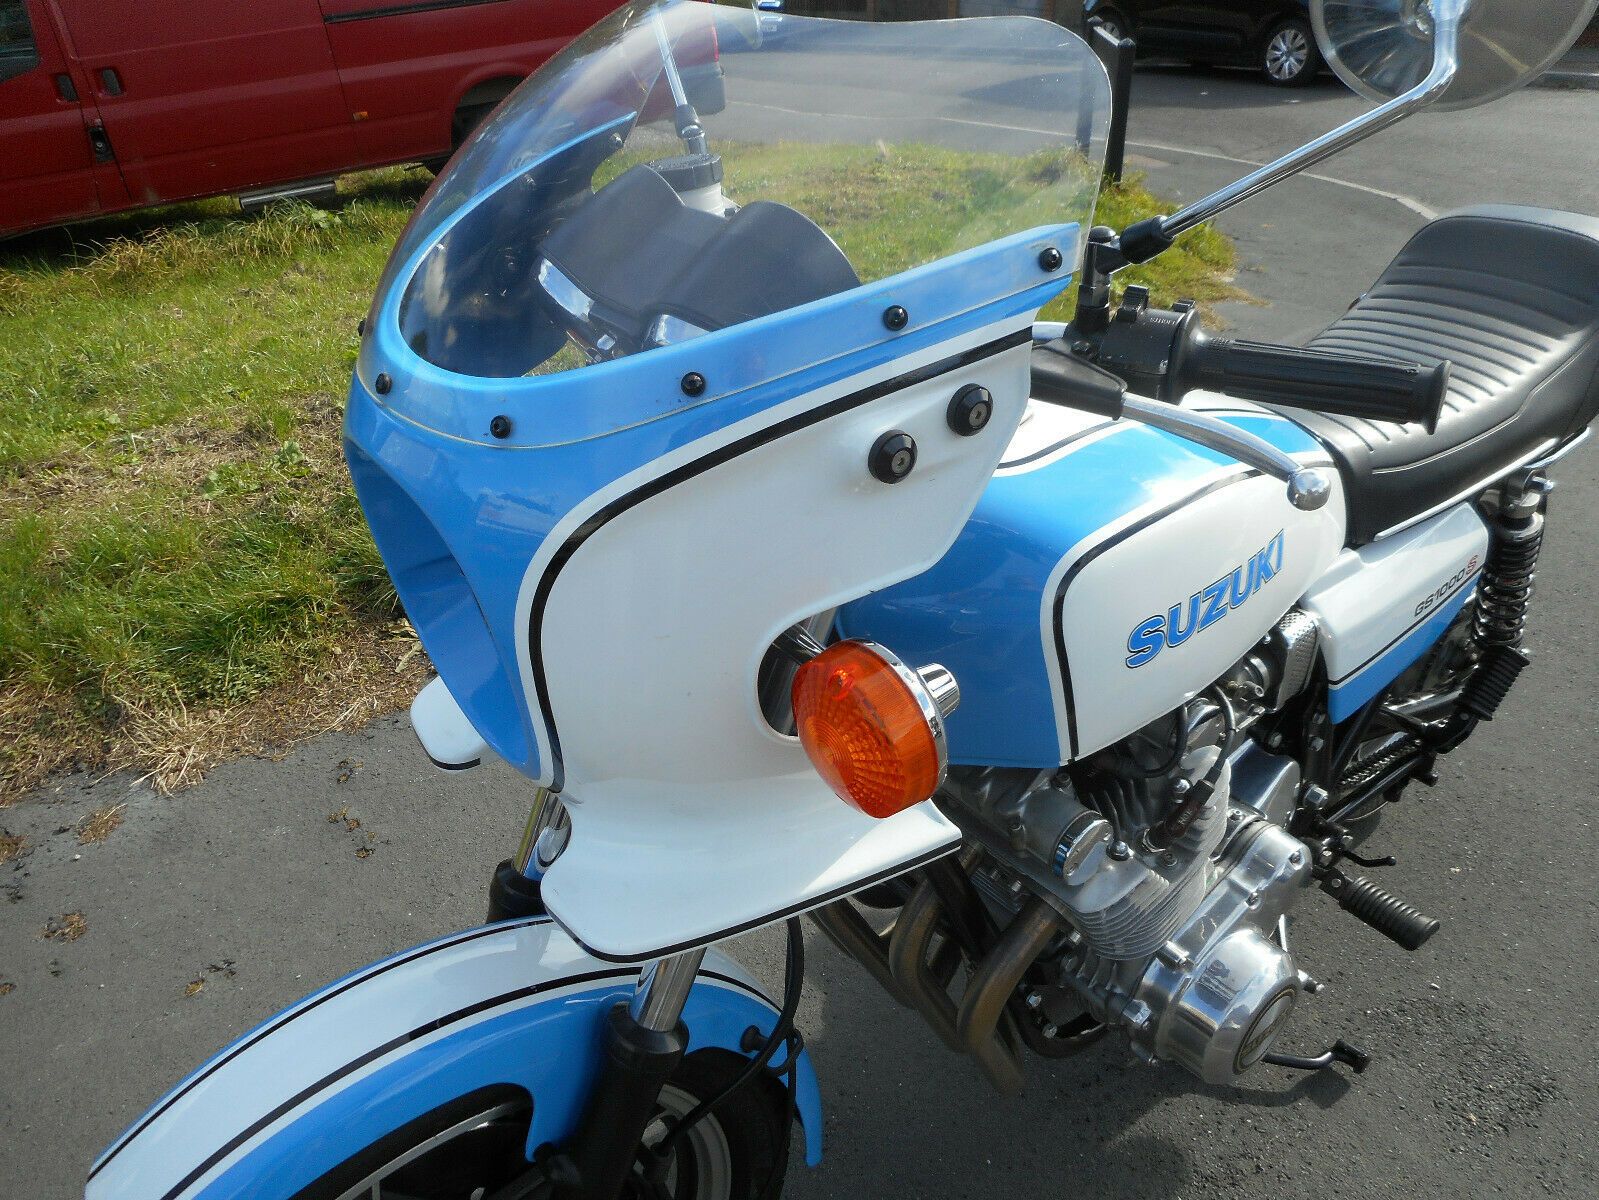 Close up photo of a Suzuki GS 1000 S in blue and white